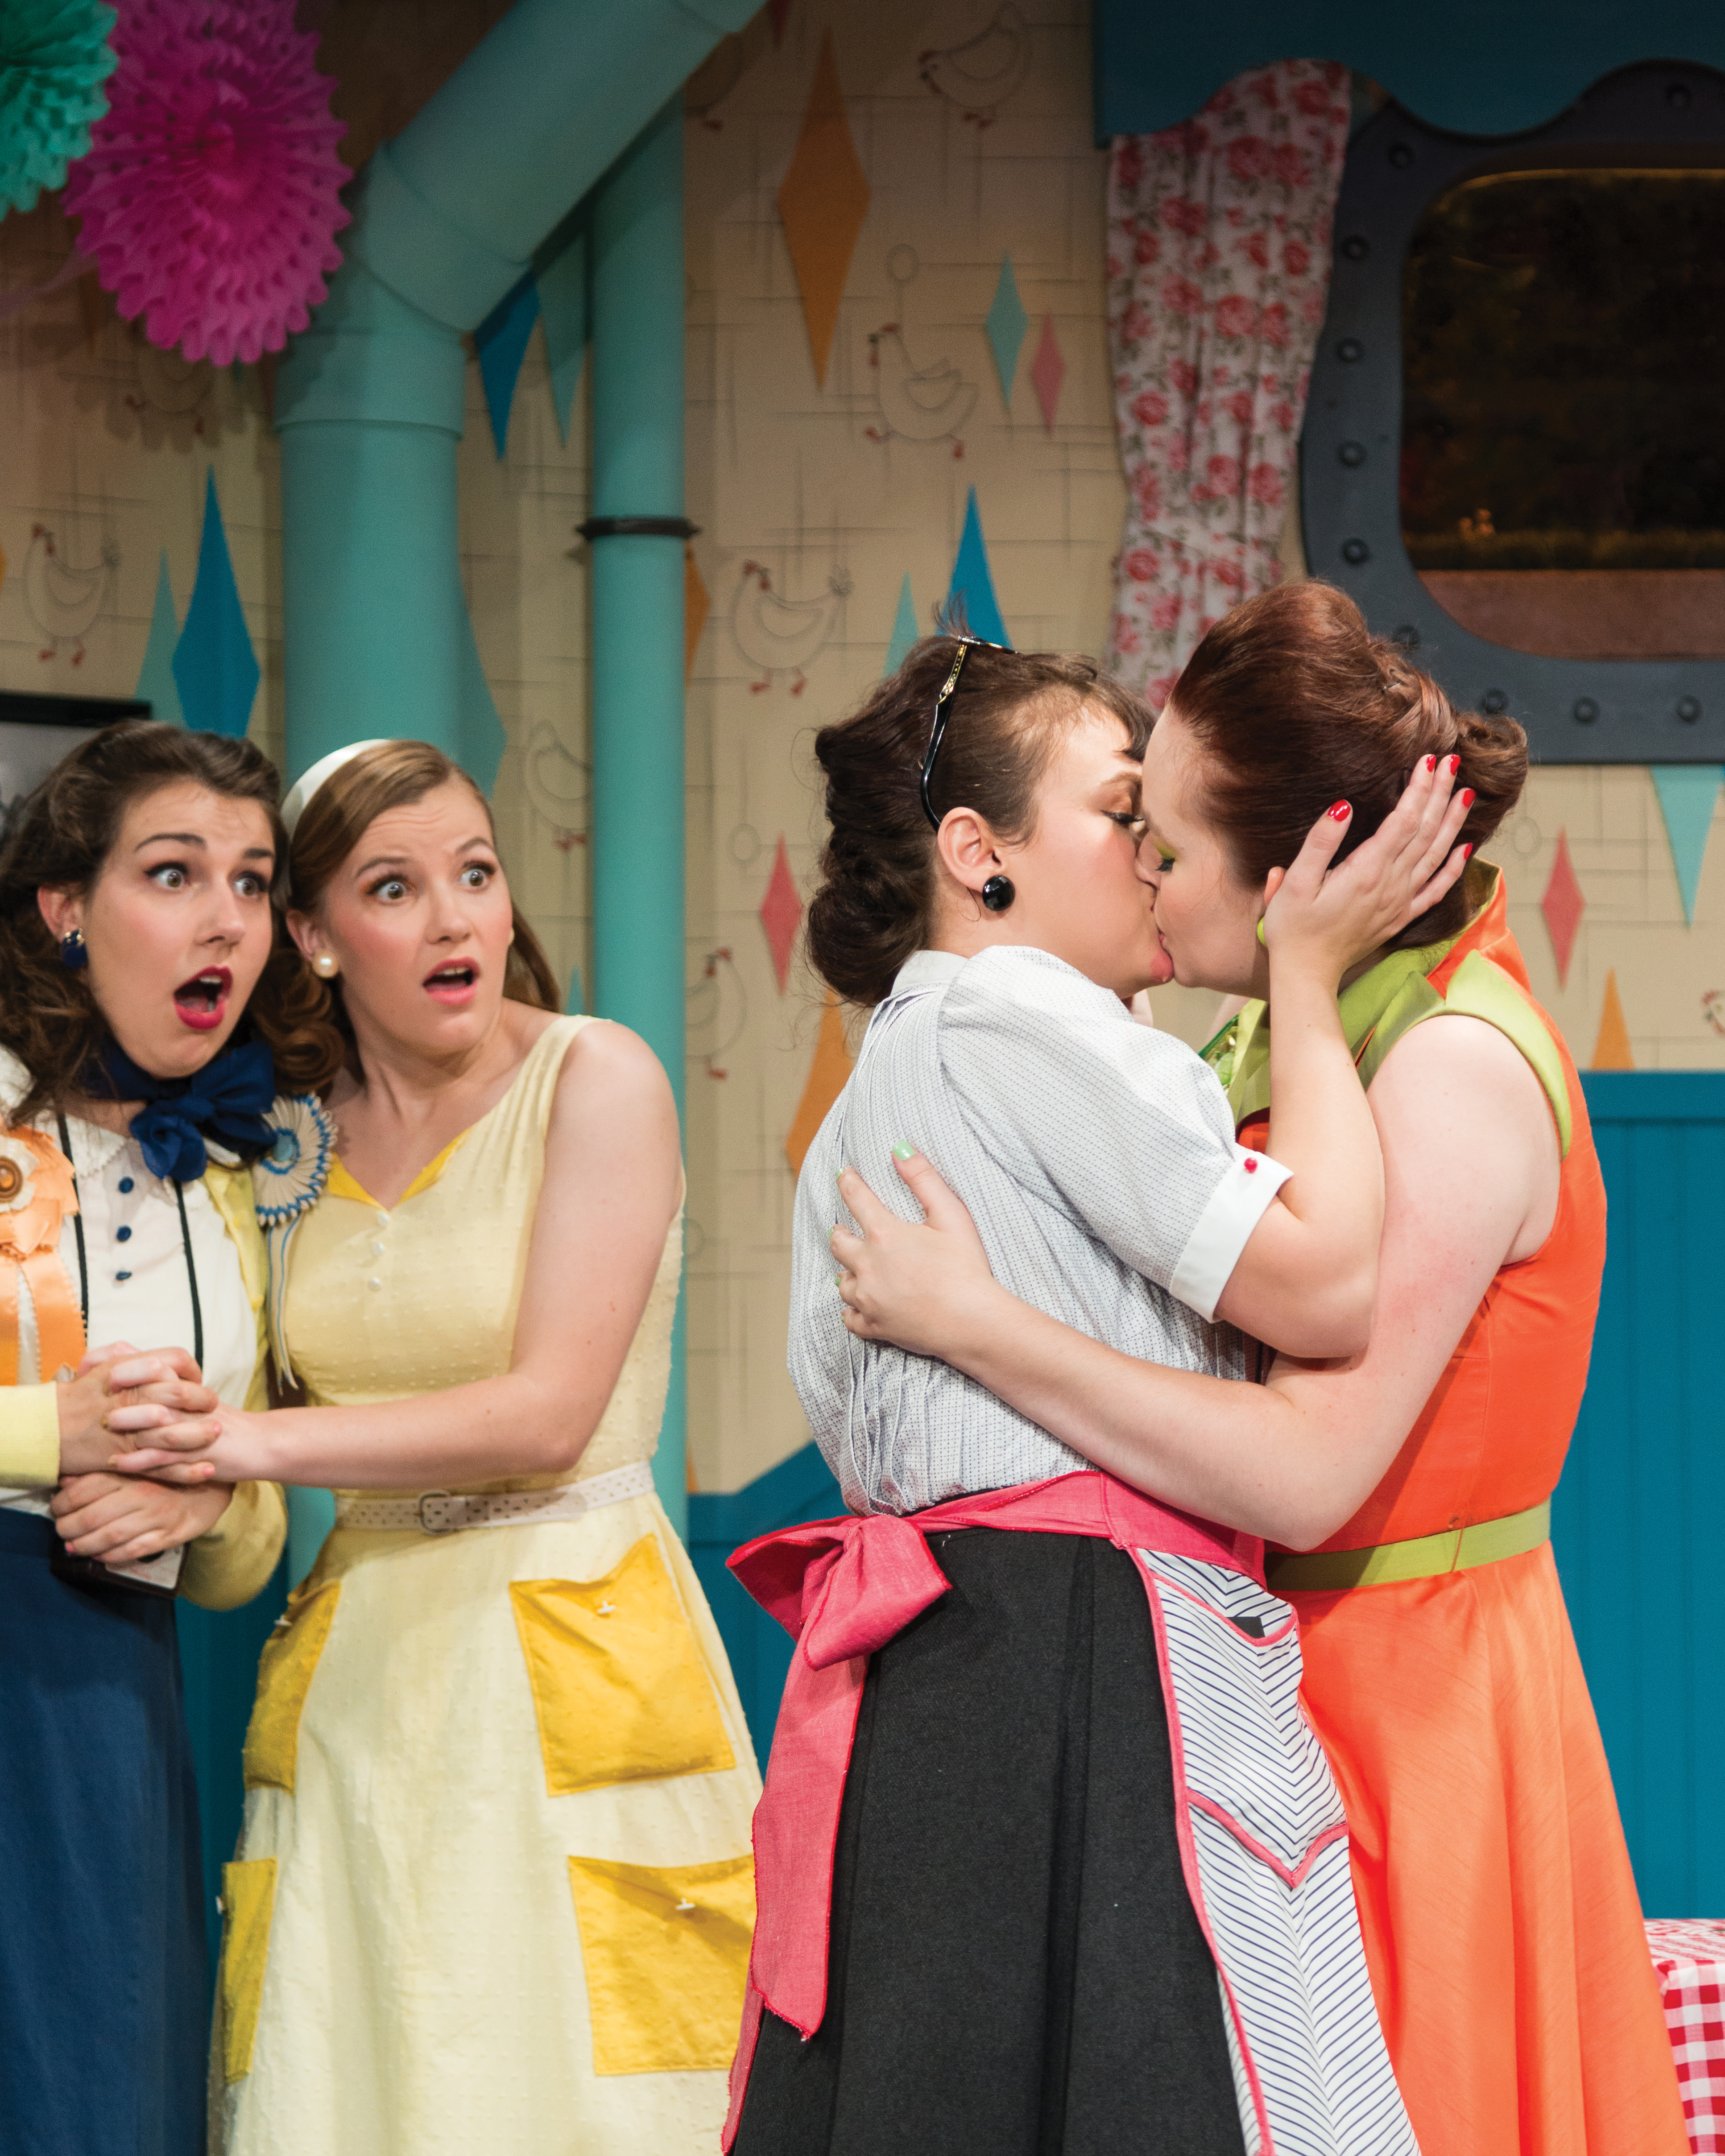 Theater department produces “5 Lesbians Eating a Quiche”